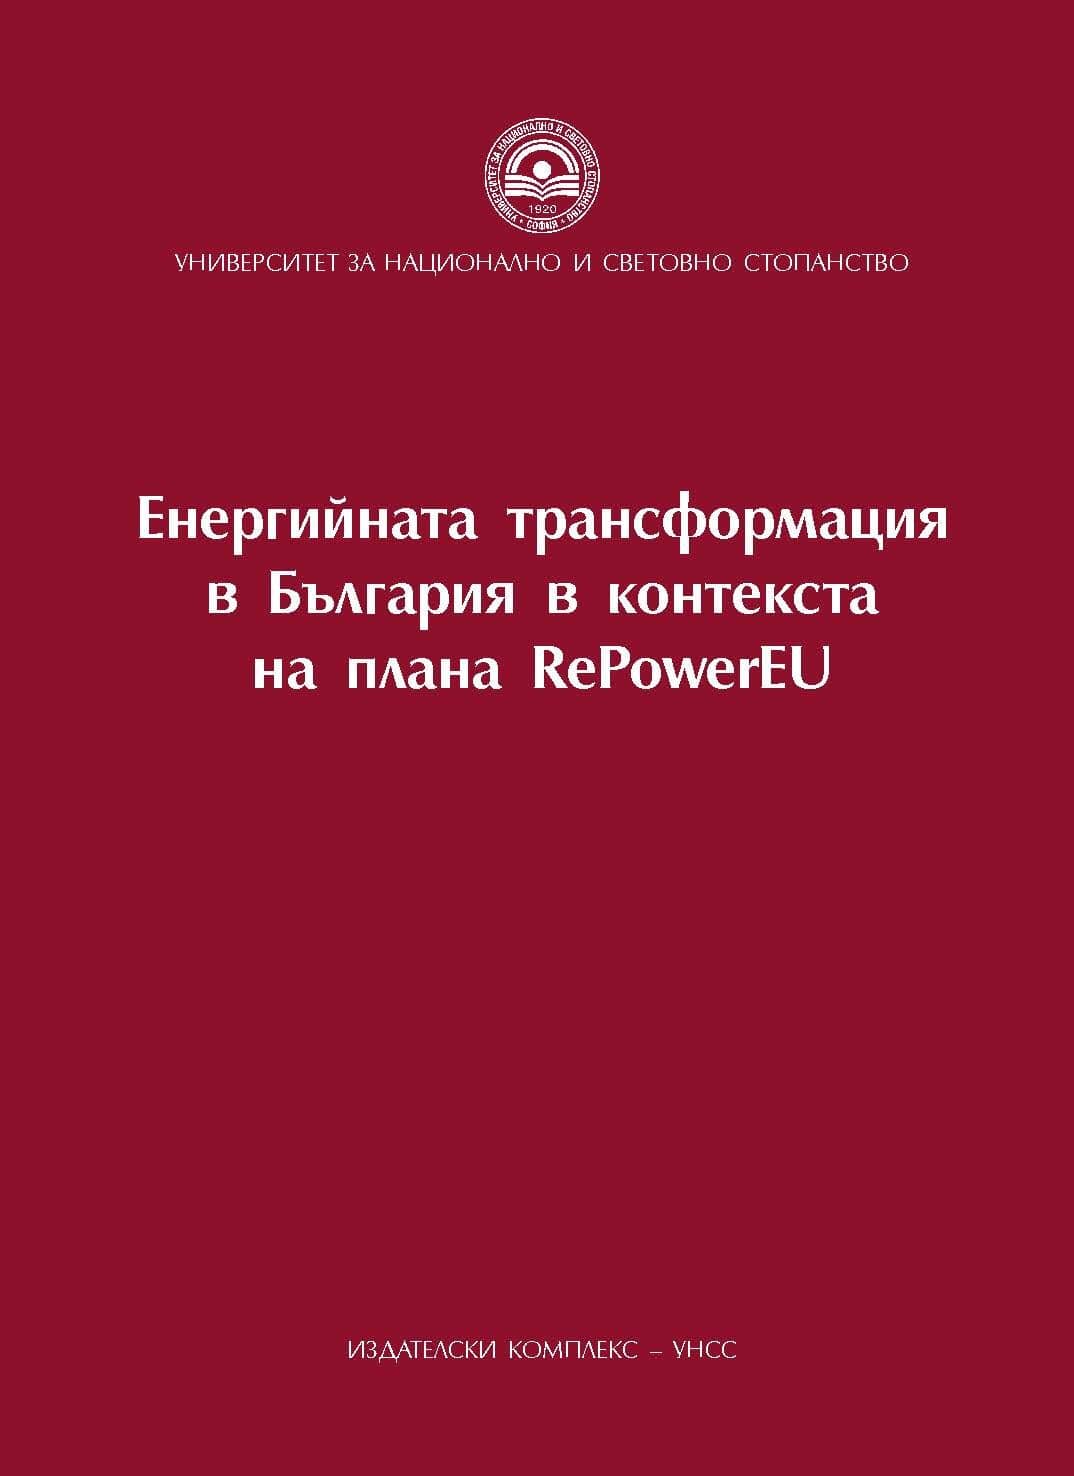 Economic characteristics of Bulgaria's nuclear power industry and its contribution to the decarbonisation of the Economy Cover Image